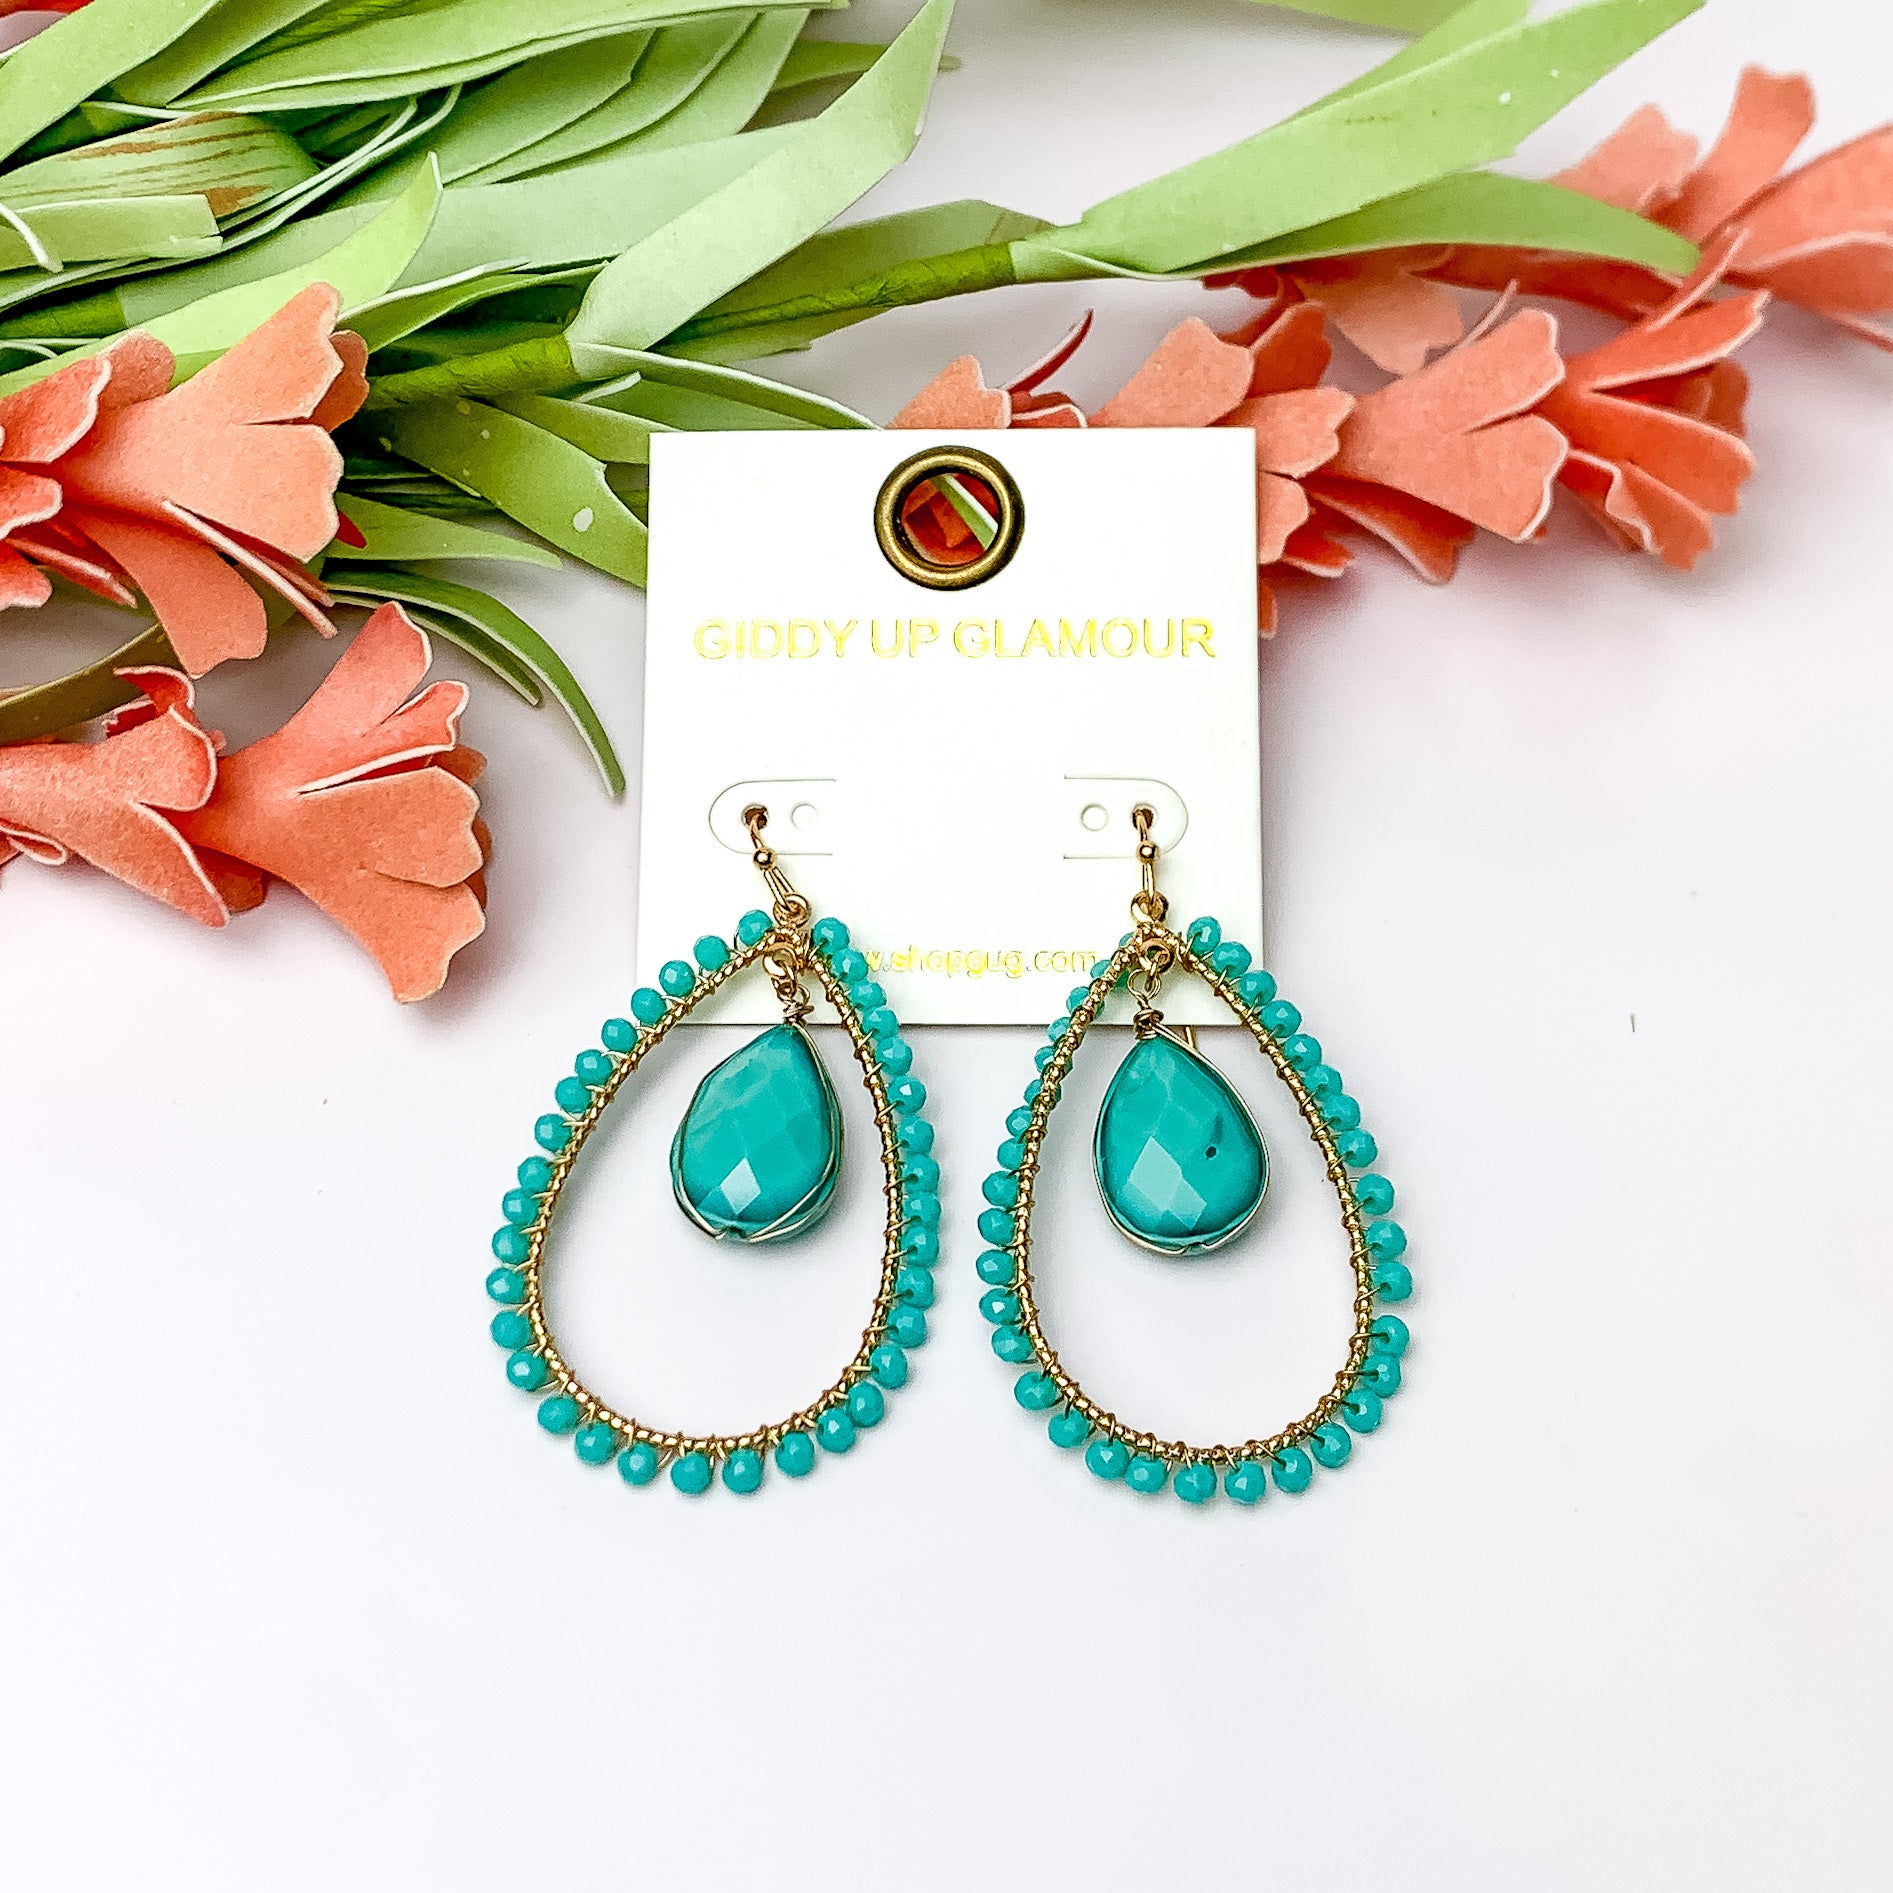 Turquoise Stone Inside Open Beaded Teardrop Earrings with Gold Tone Outline. Pictured on a white background with flowers at the top.